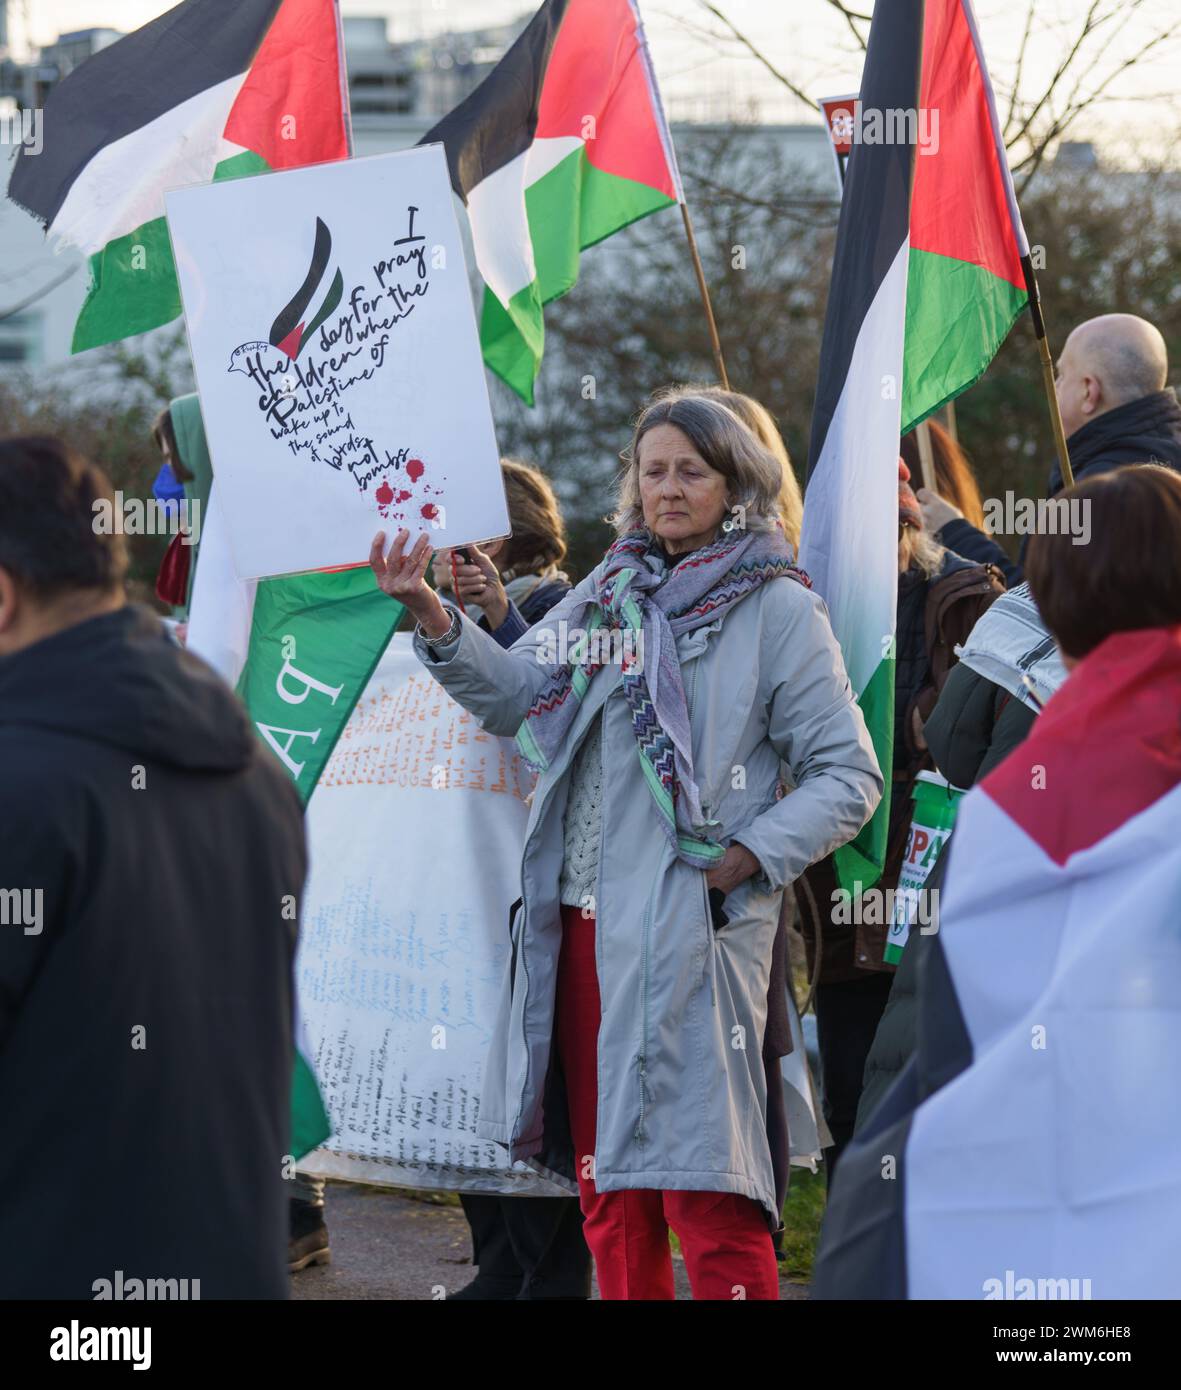 Bristol, UK Feb 24th 2024. Campaigners from Palestine Action have held a peaceful gathering outside of the Elbit Systems UK weapons factory in Bristol to protest against the manufacture of weapons used in the conflict in Gaza, and the UK government support for the war. The Israeli owned facility acts as a research, development and manufacturing hub for weapons and technology provided to the British Armed Forces and other NATO customers by the company. PICTURED: Poster- 'I pray for the day when the children of Palestine wake up to the sound of birds not bombs'. BridgetCatterall/AlamtLiveNews Stock Photo